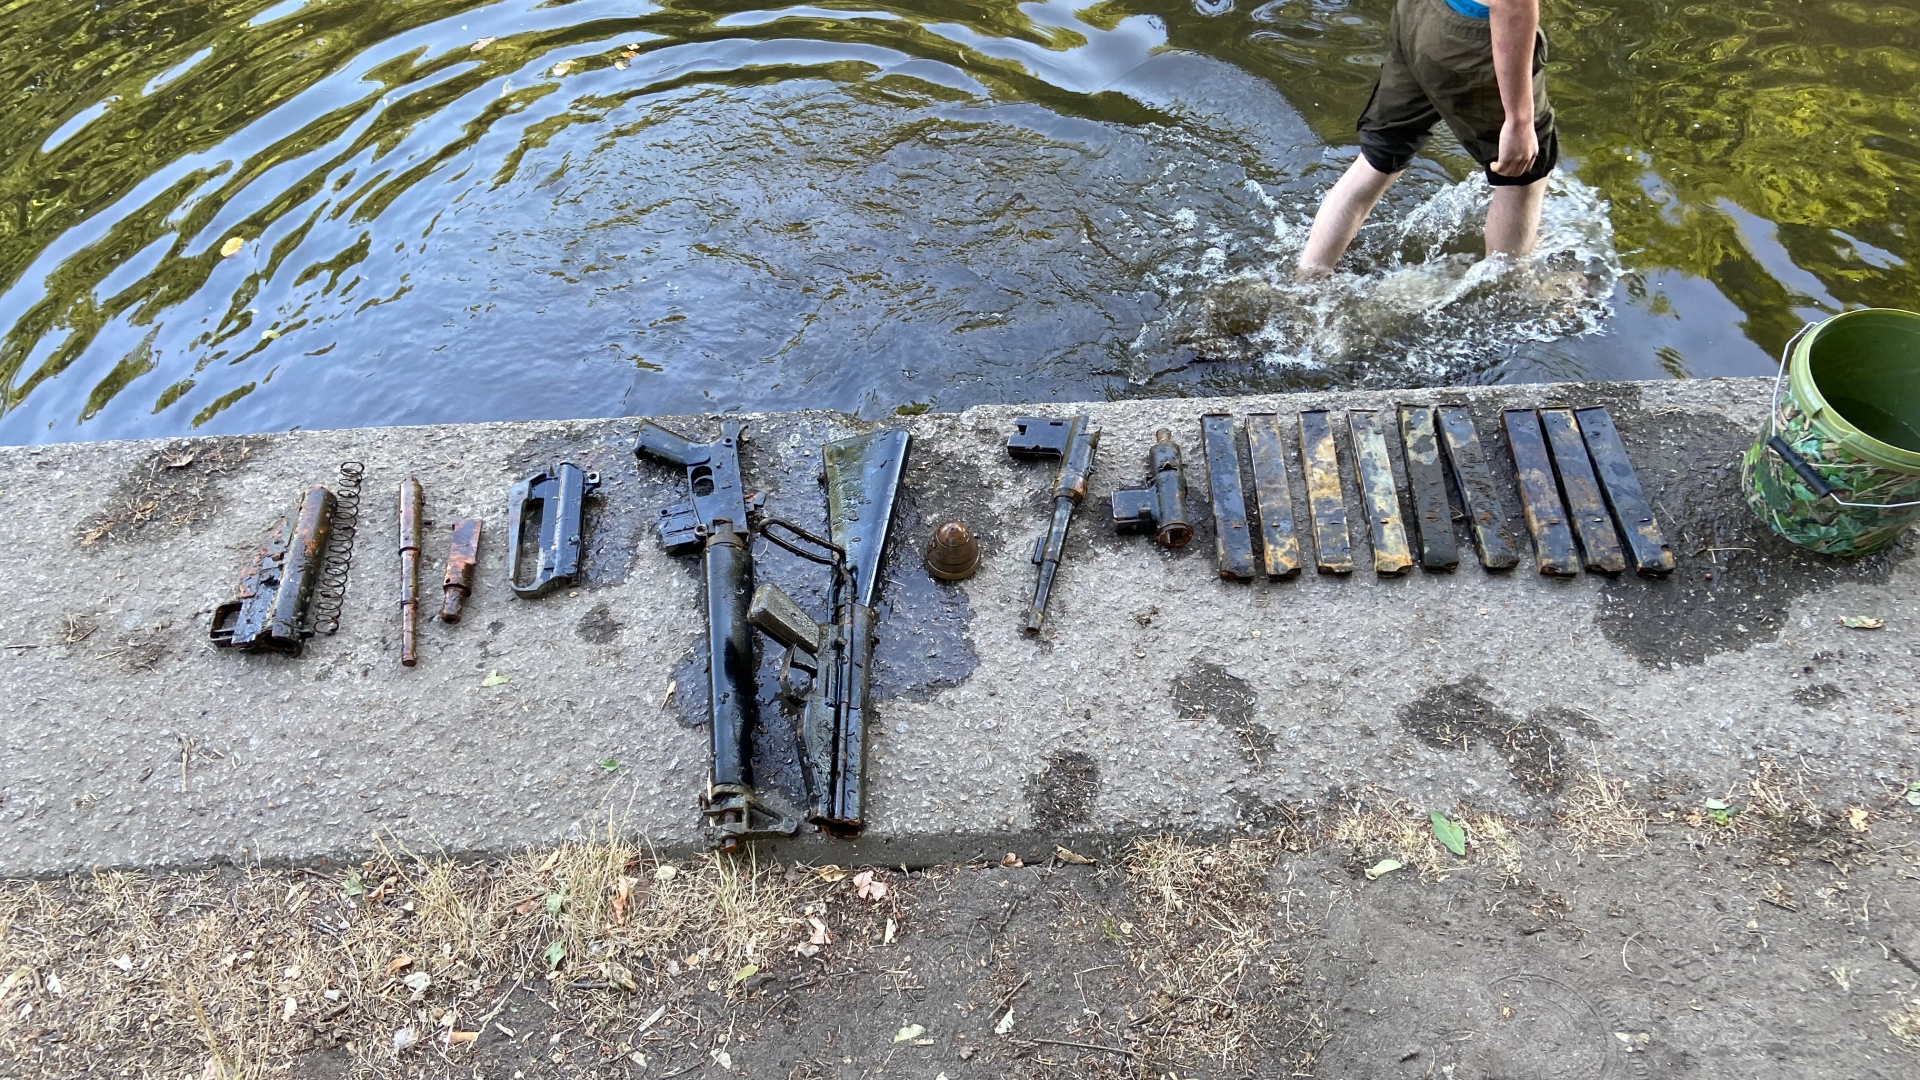 Dad in shock after teen discovers cache of FIREARMS left behind in London river during family outing